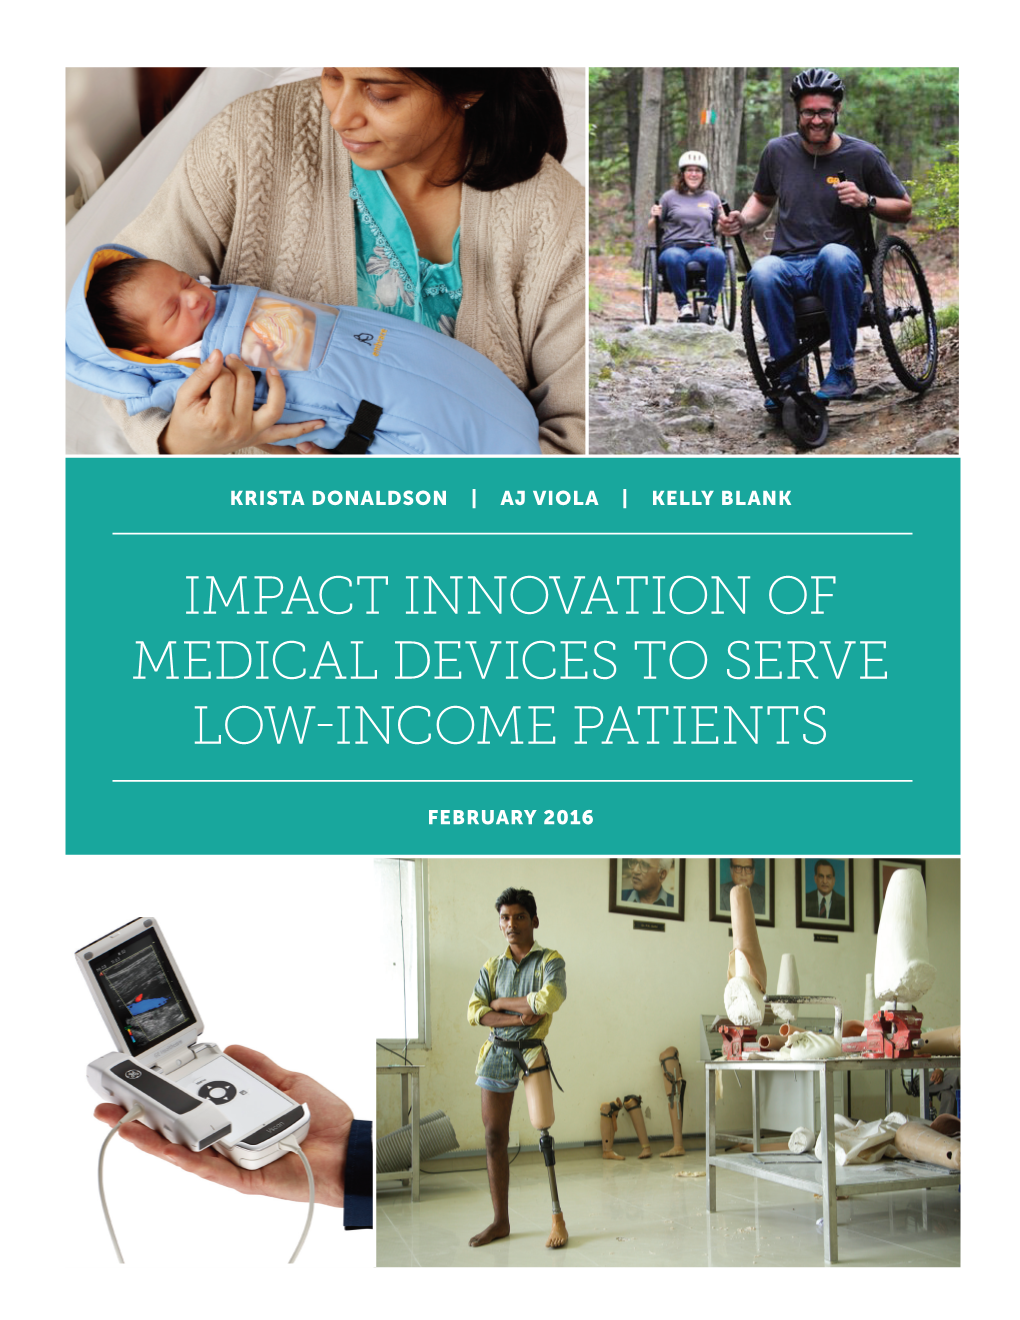 Impact Innovation of Medical Devices to Serve Low-Income Patients